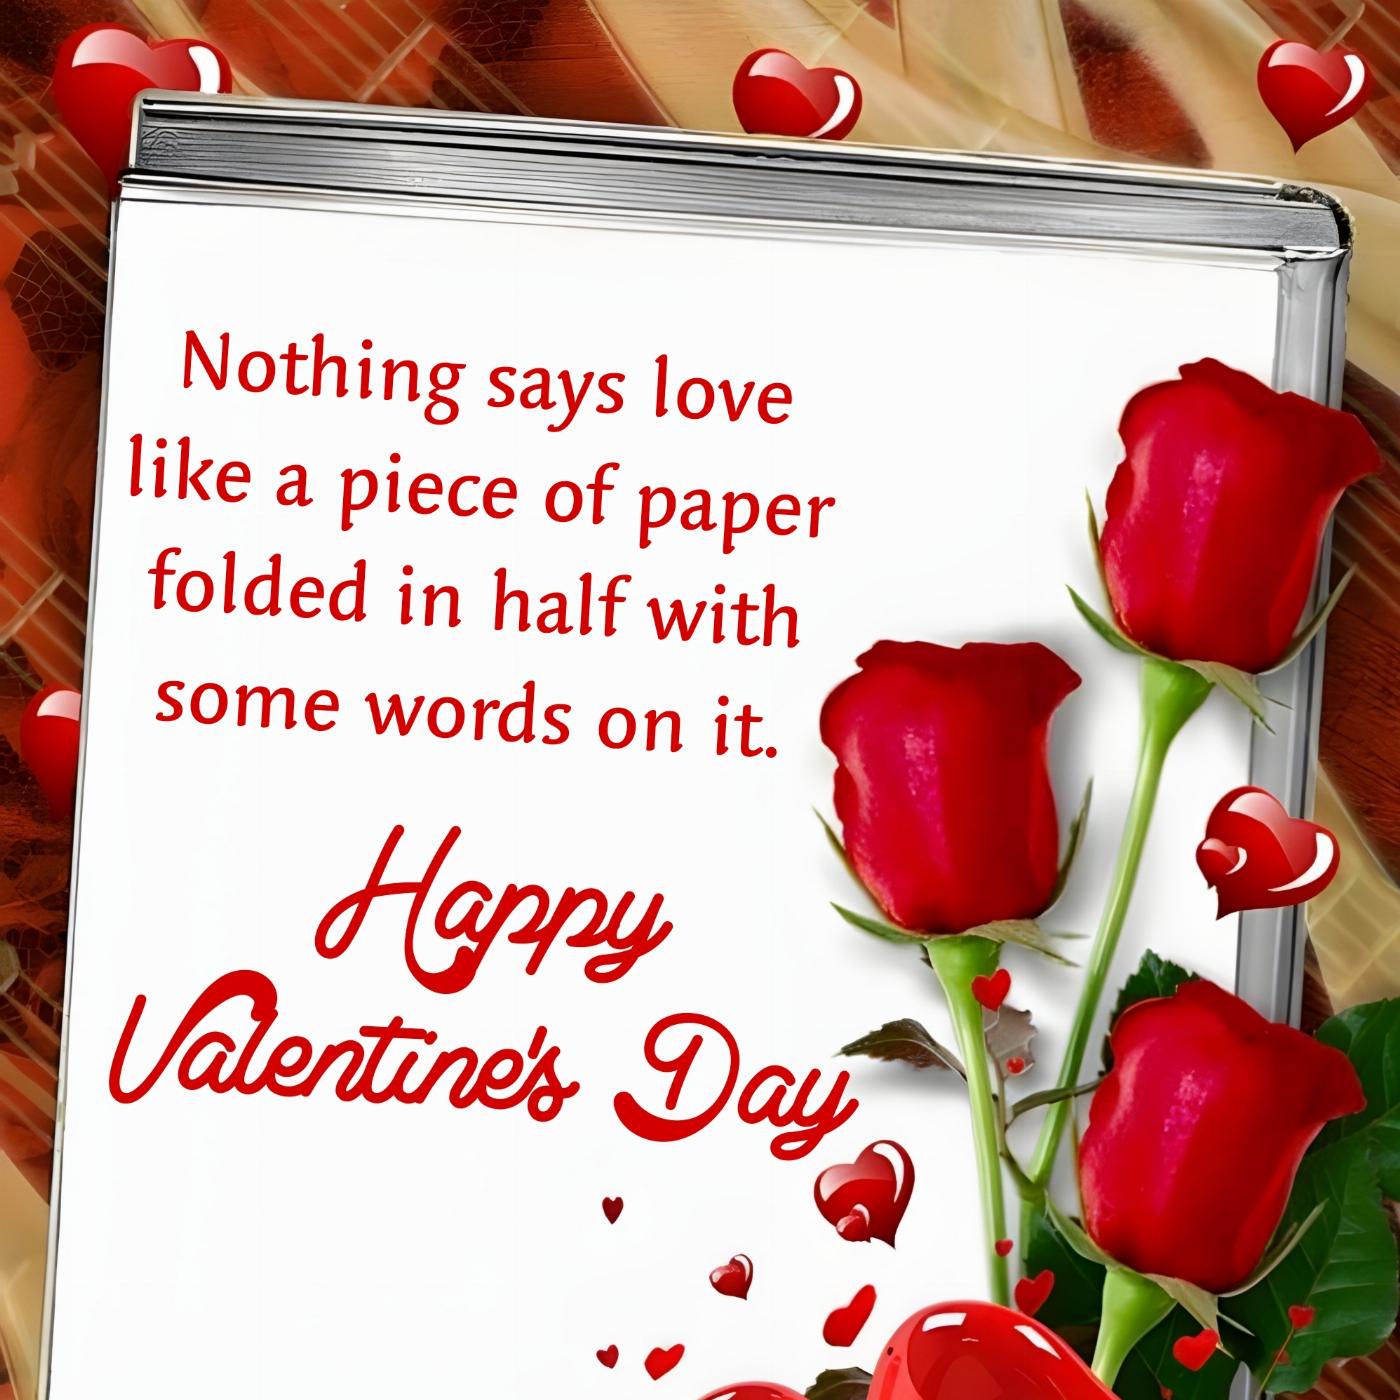 Nothing says love like a piece of paper folded in half with some words on it